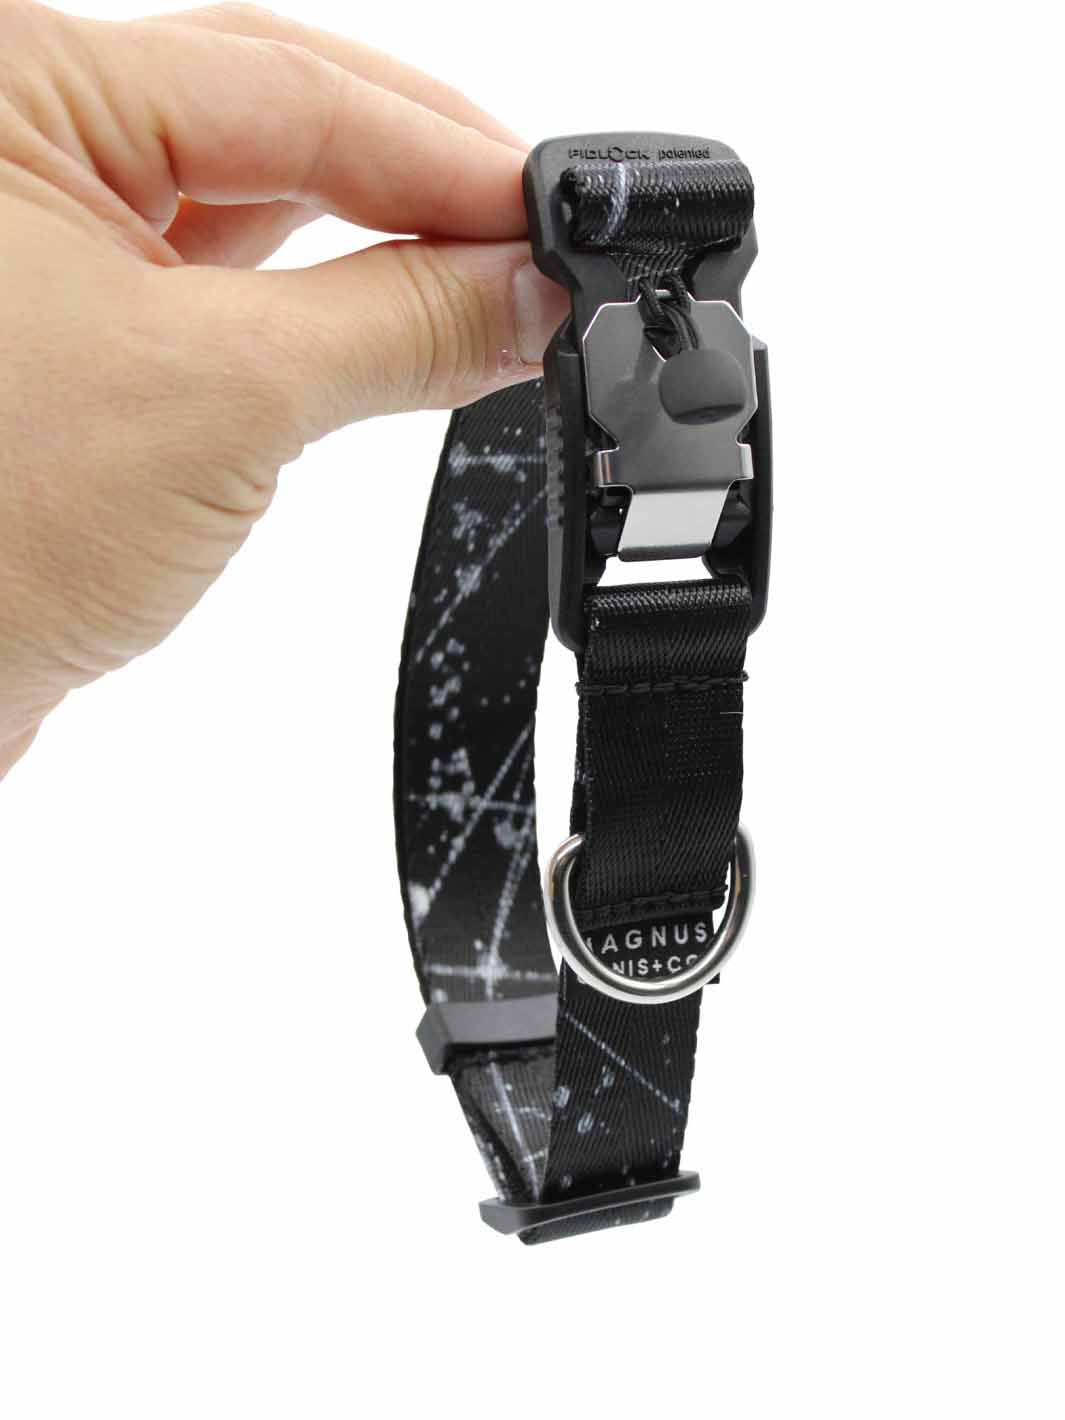 A black nylon strap dog collar with white spatter print design and a magnetic buckle being held vertically.